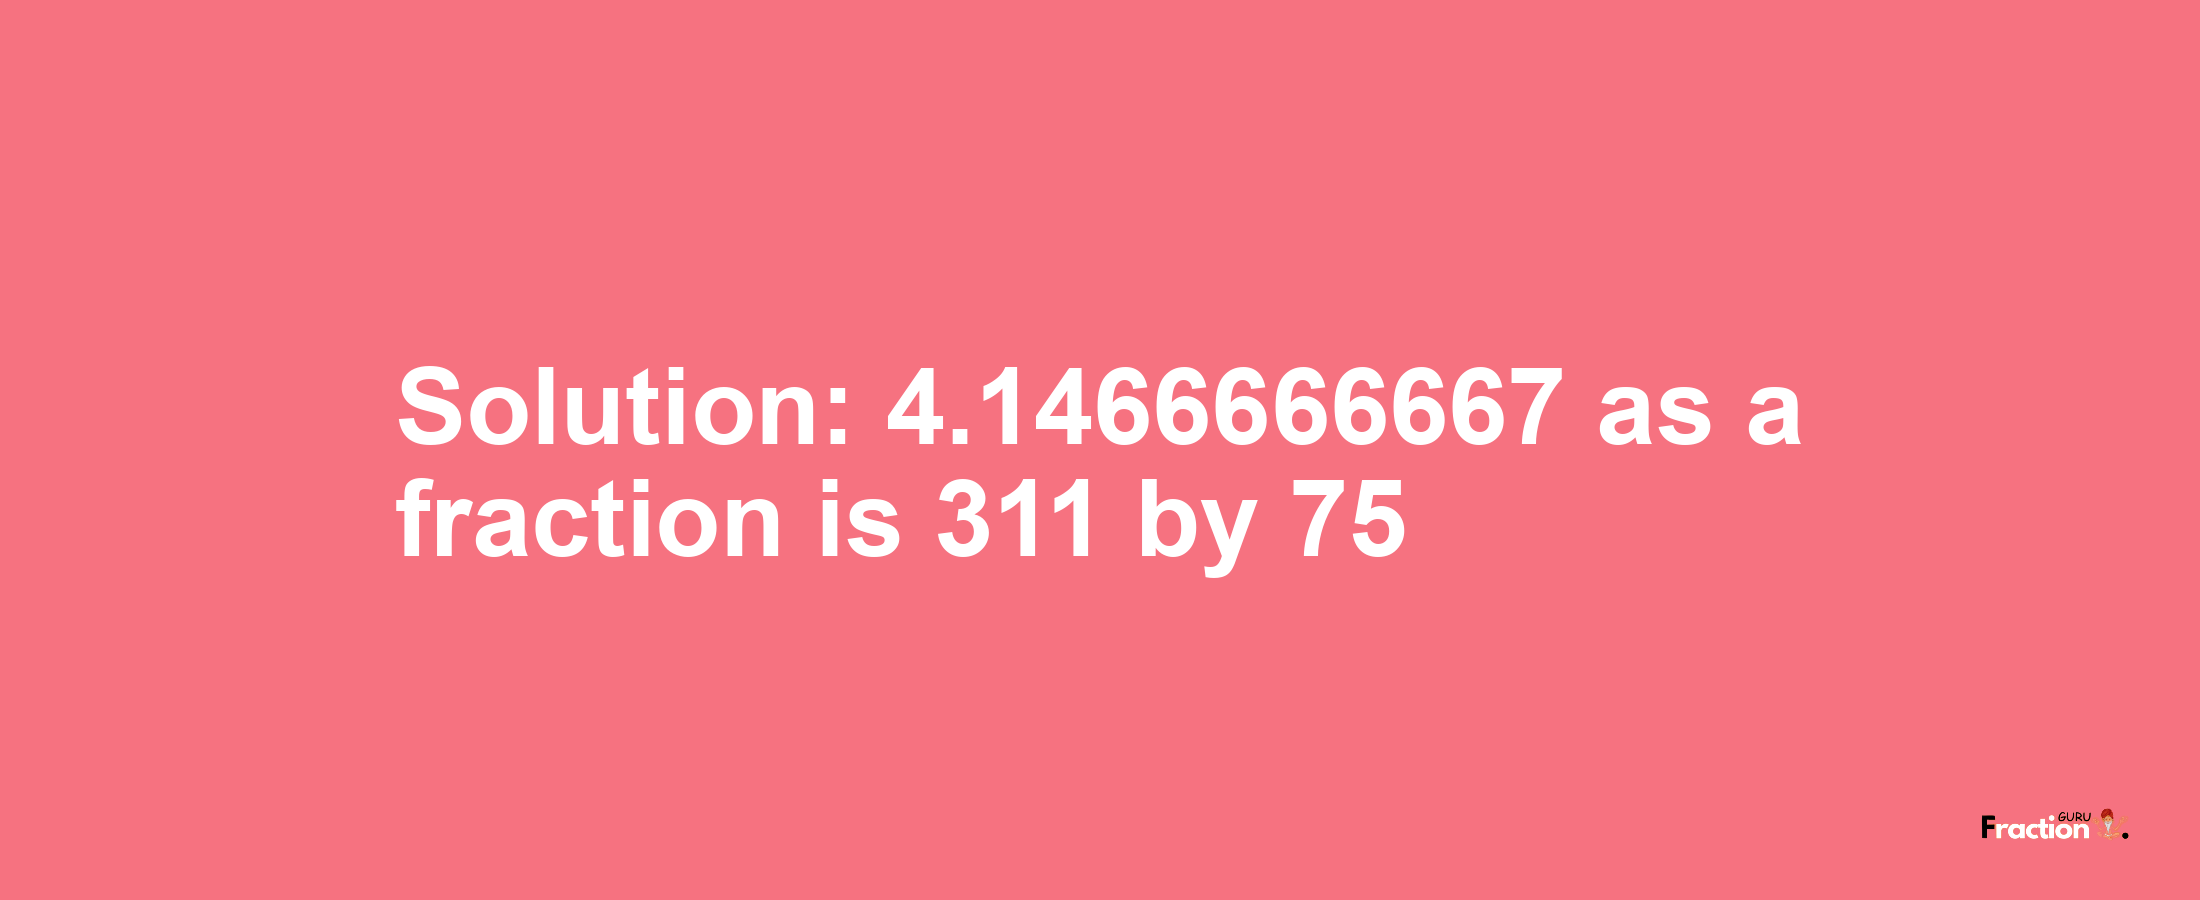 Solution:4.1466666667 as a fraction is 311/75